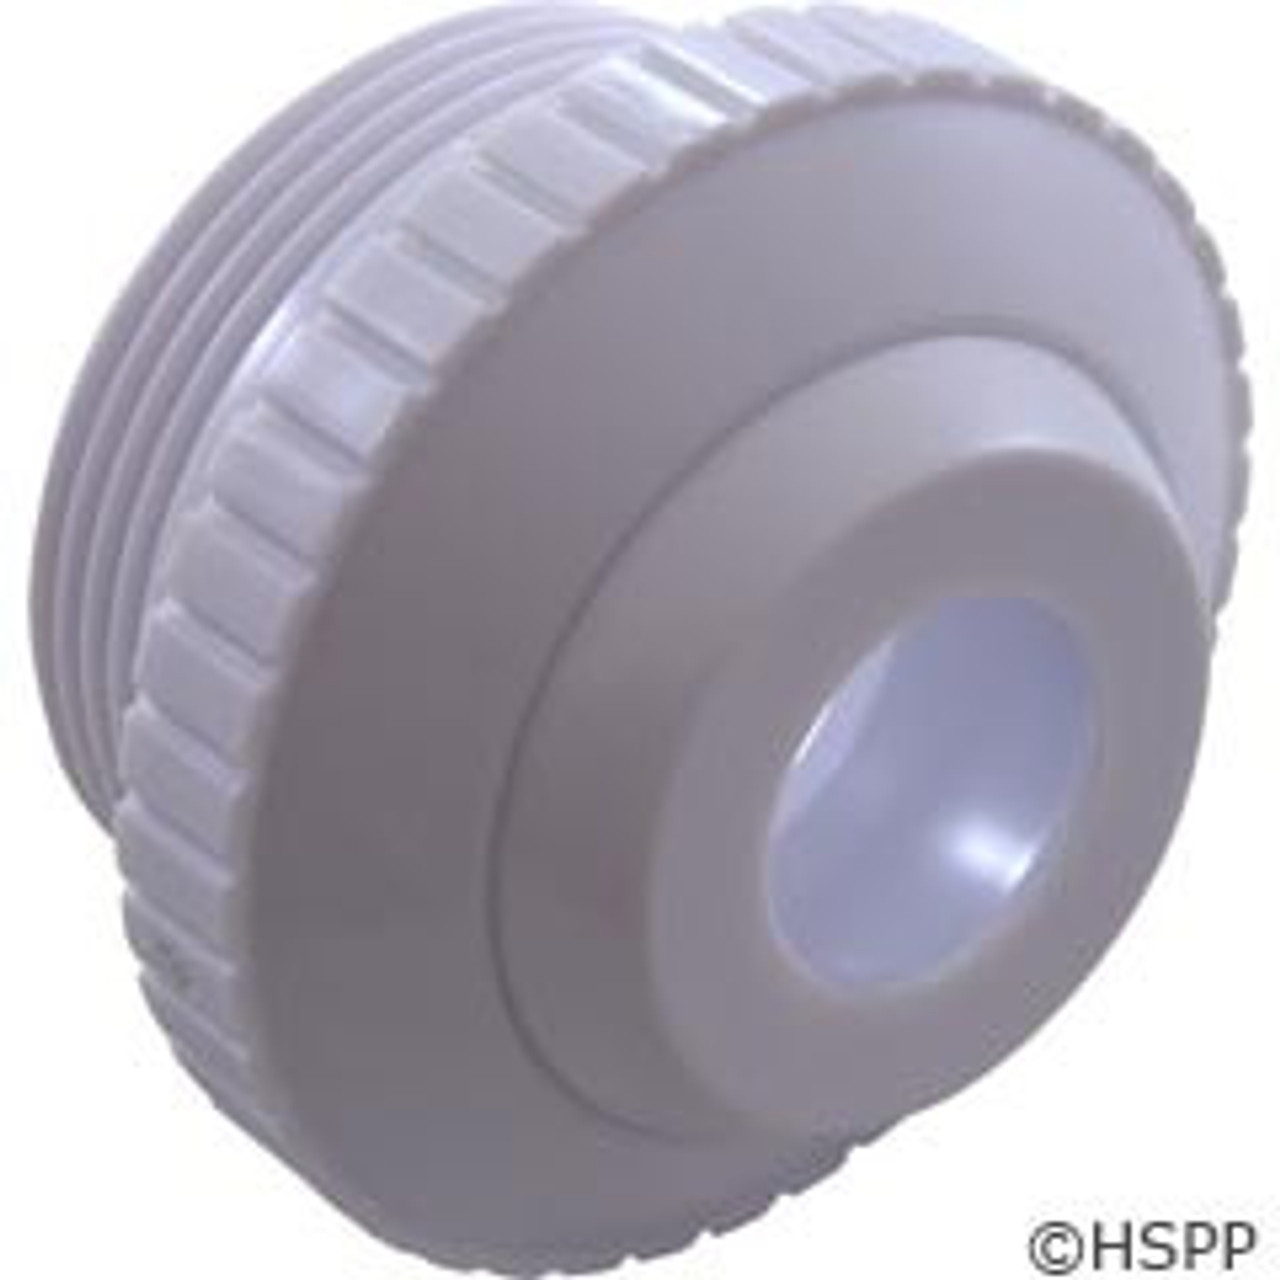 Inlet Fitting, Pentair, 1-1/2"mpt, 3/4" Orifice, White